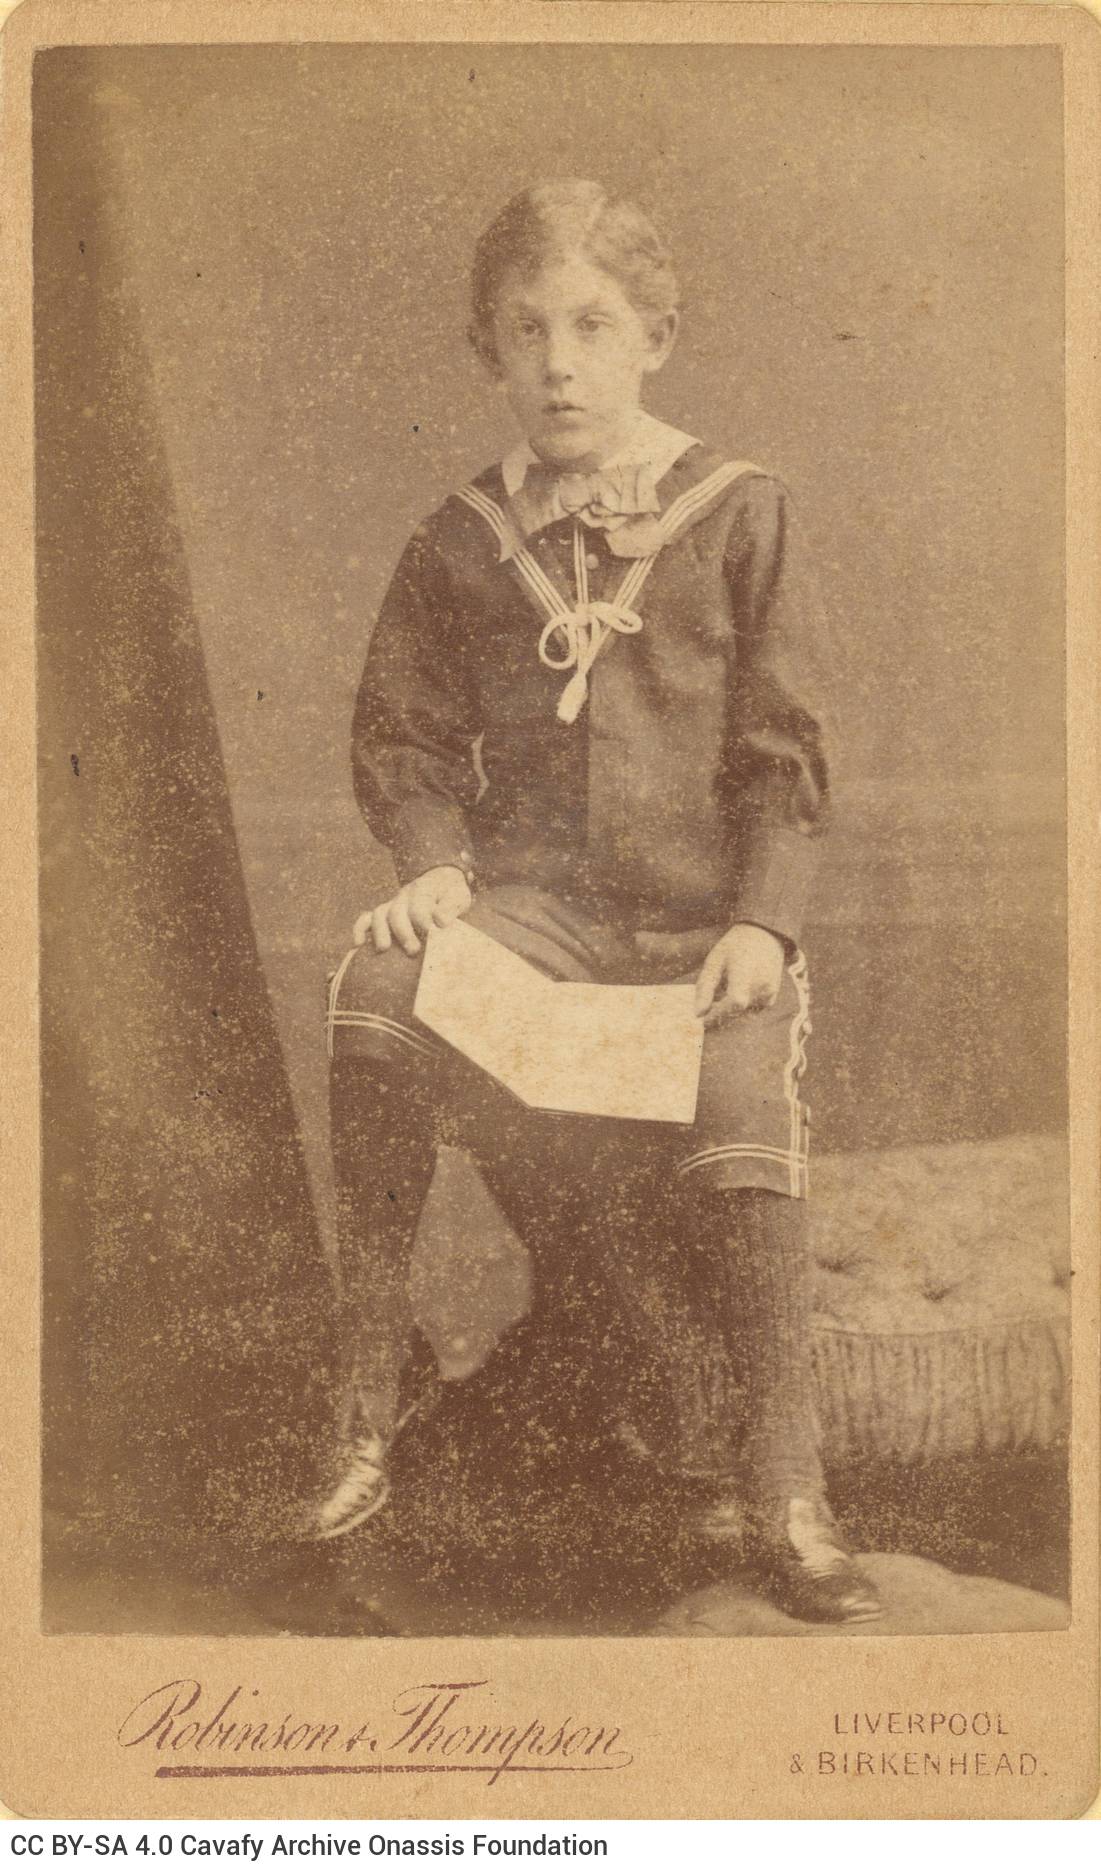 Photograph of a boy in sailor's clothes, sitting on the arm of a seat and holding a book in his hands. The logo of the photo 